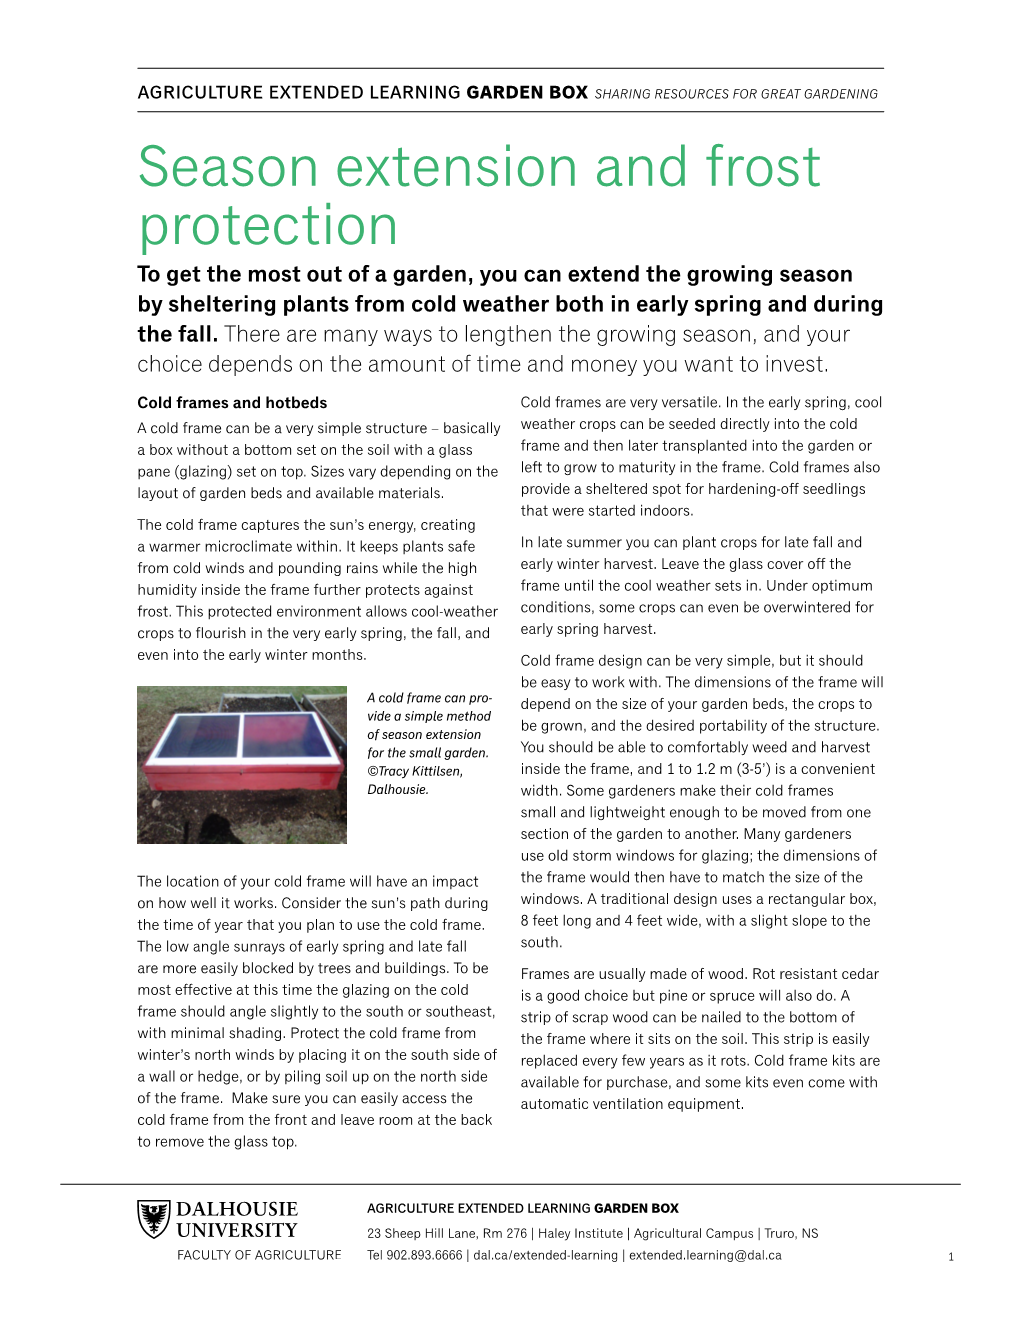 Season Extension and Frost Protection